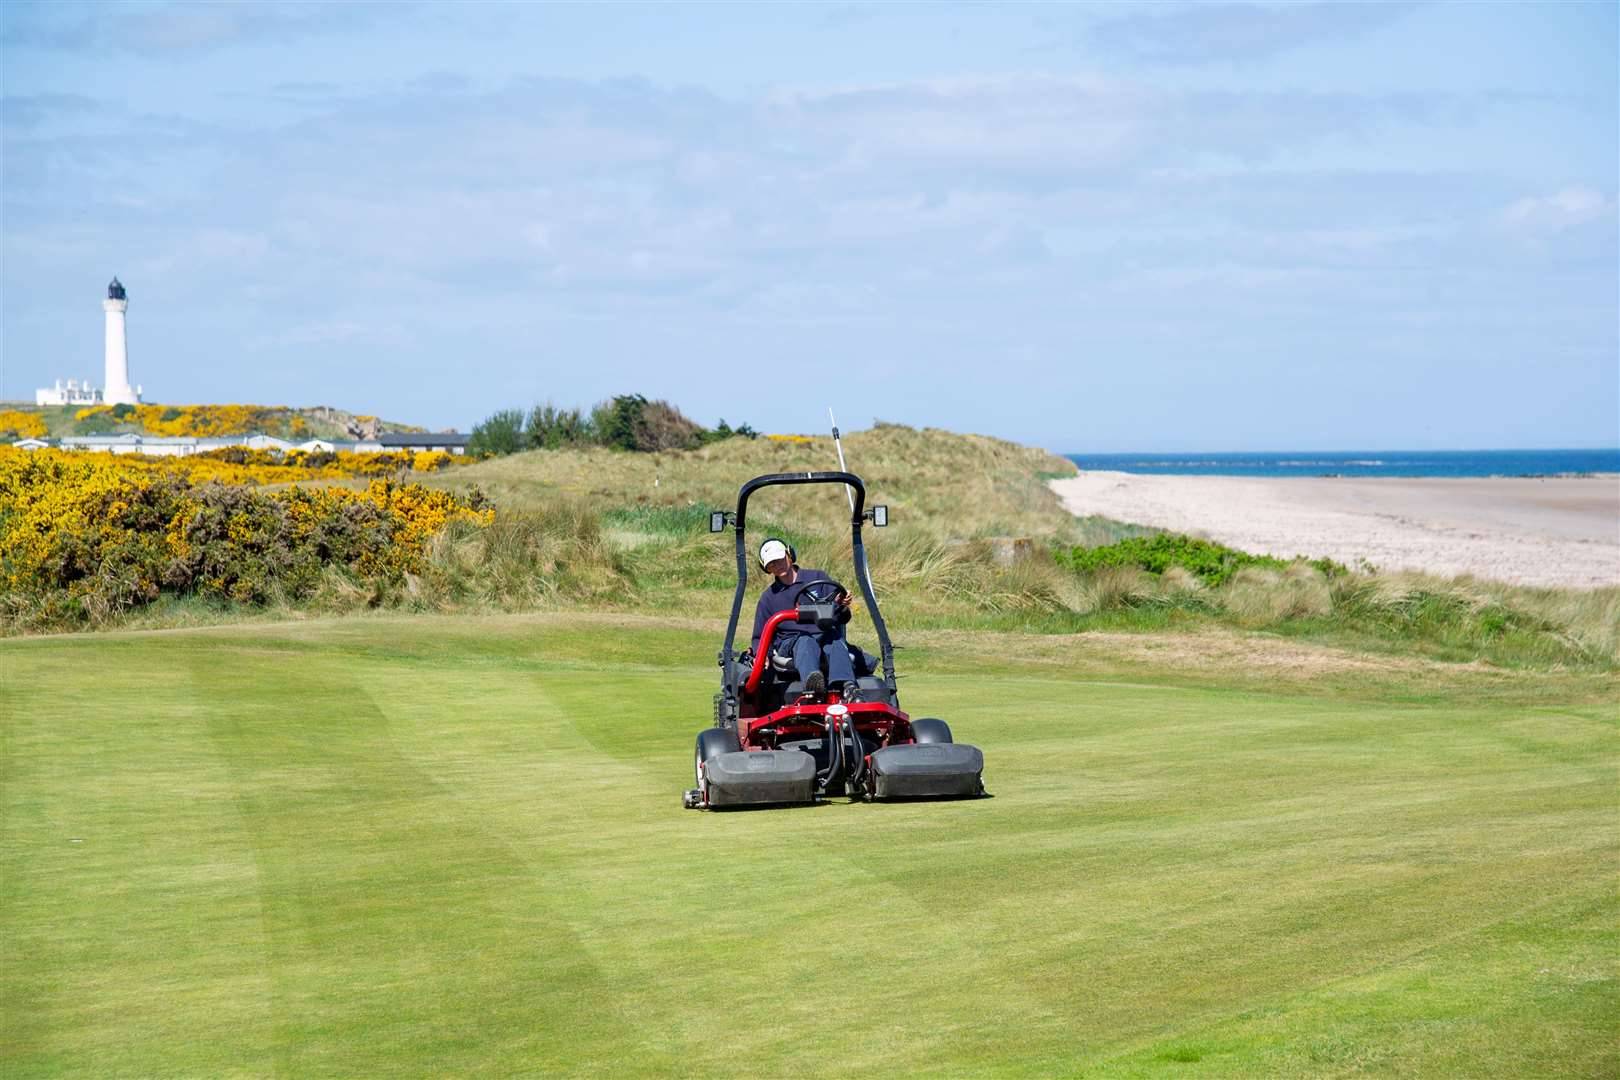 Ryan Sherwood drives up the fairway as preparations continue at Moray Golf Club. Picture: Daniel Forsyth.